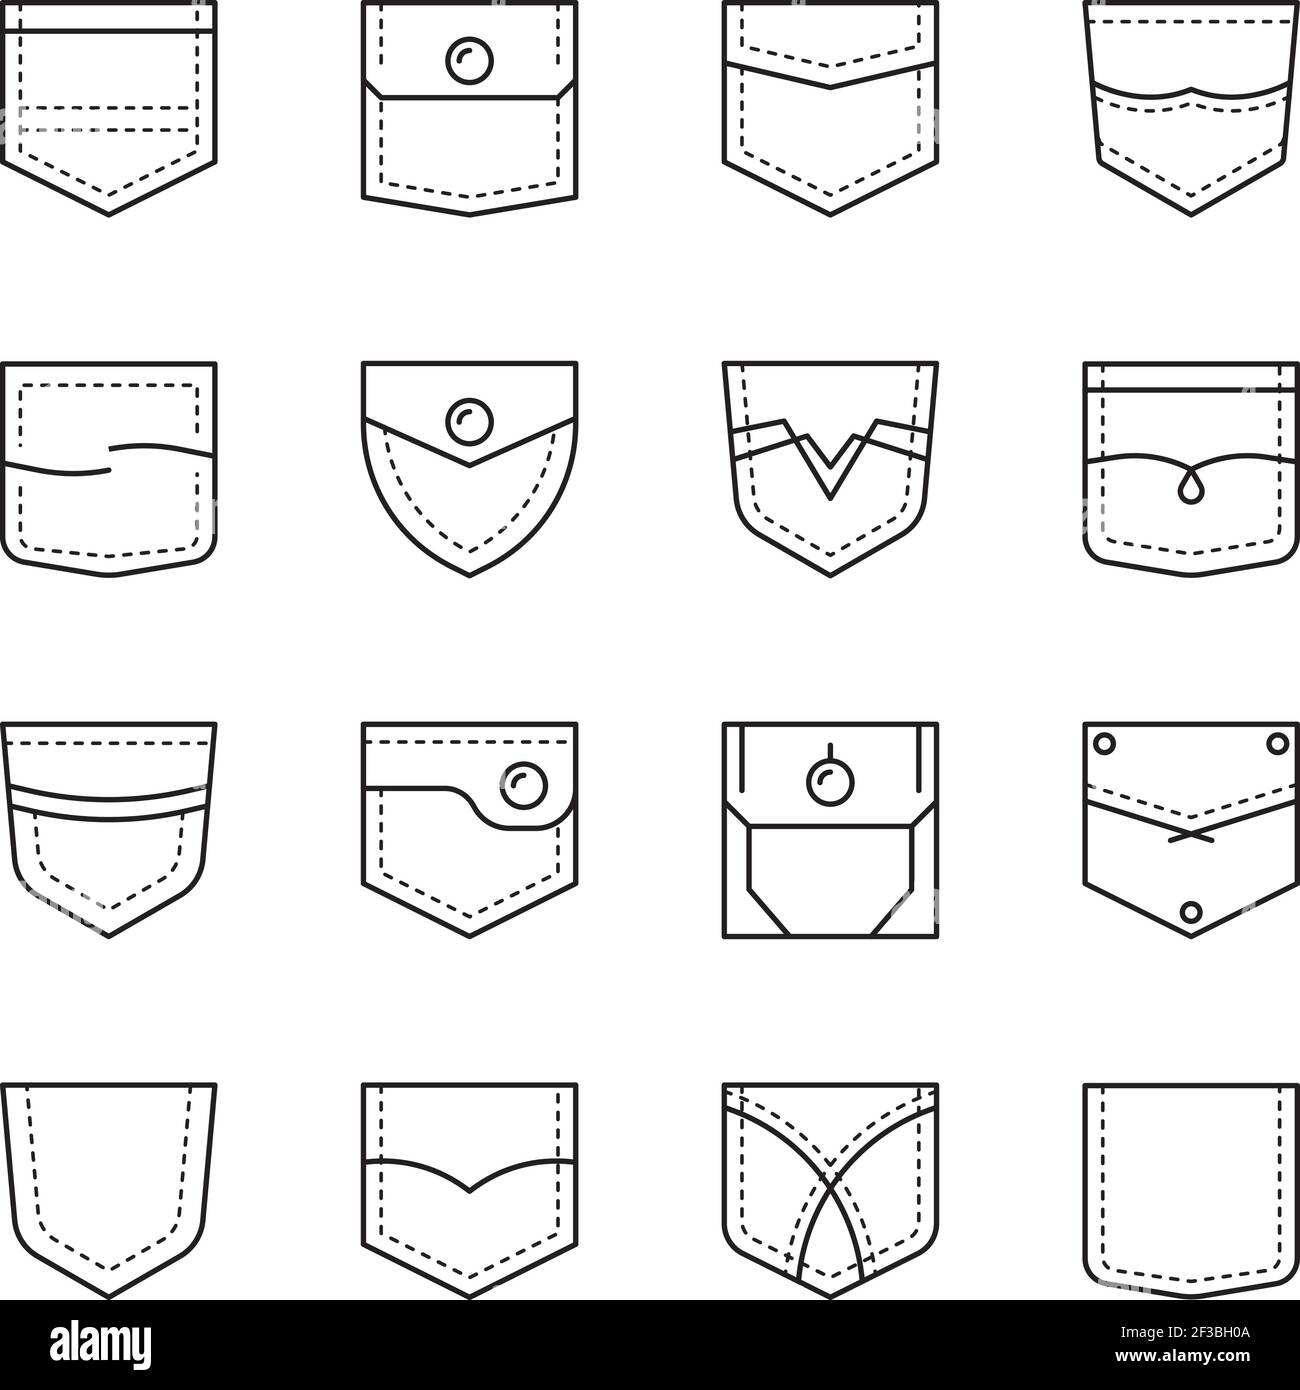 Pocket shapes. Textile sew clothe pockets bag casual style vector ...